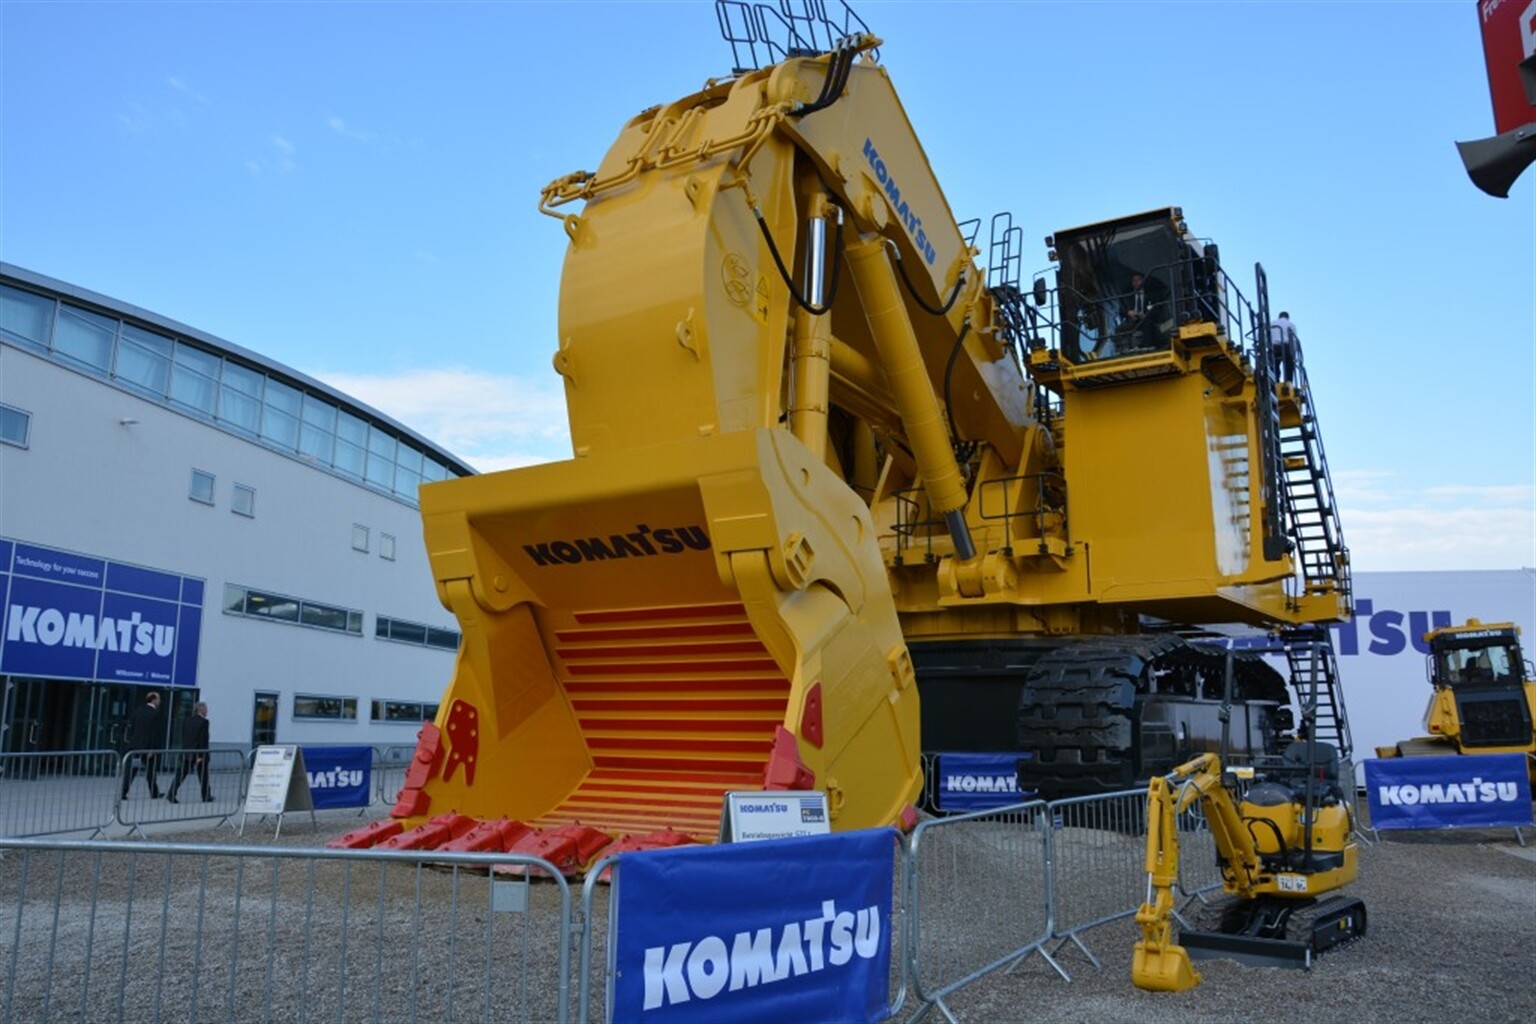 The Beast of Bauma in action